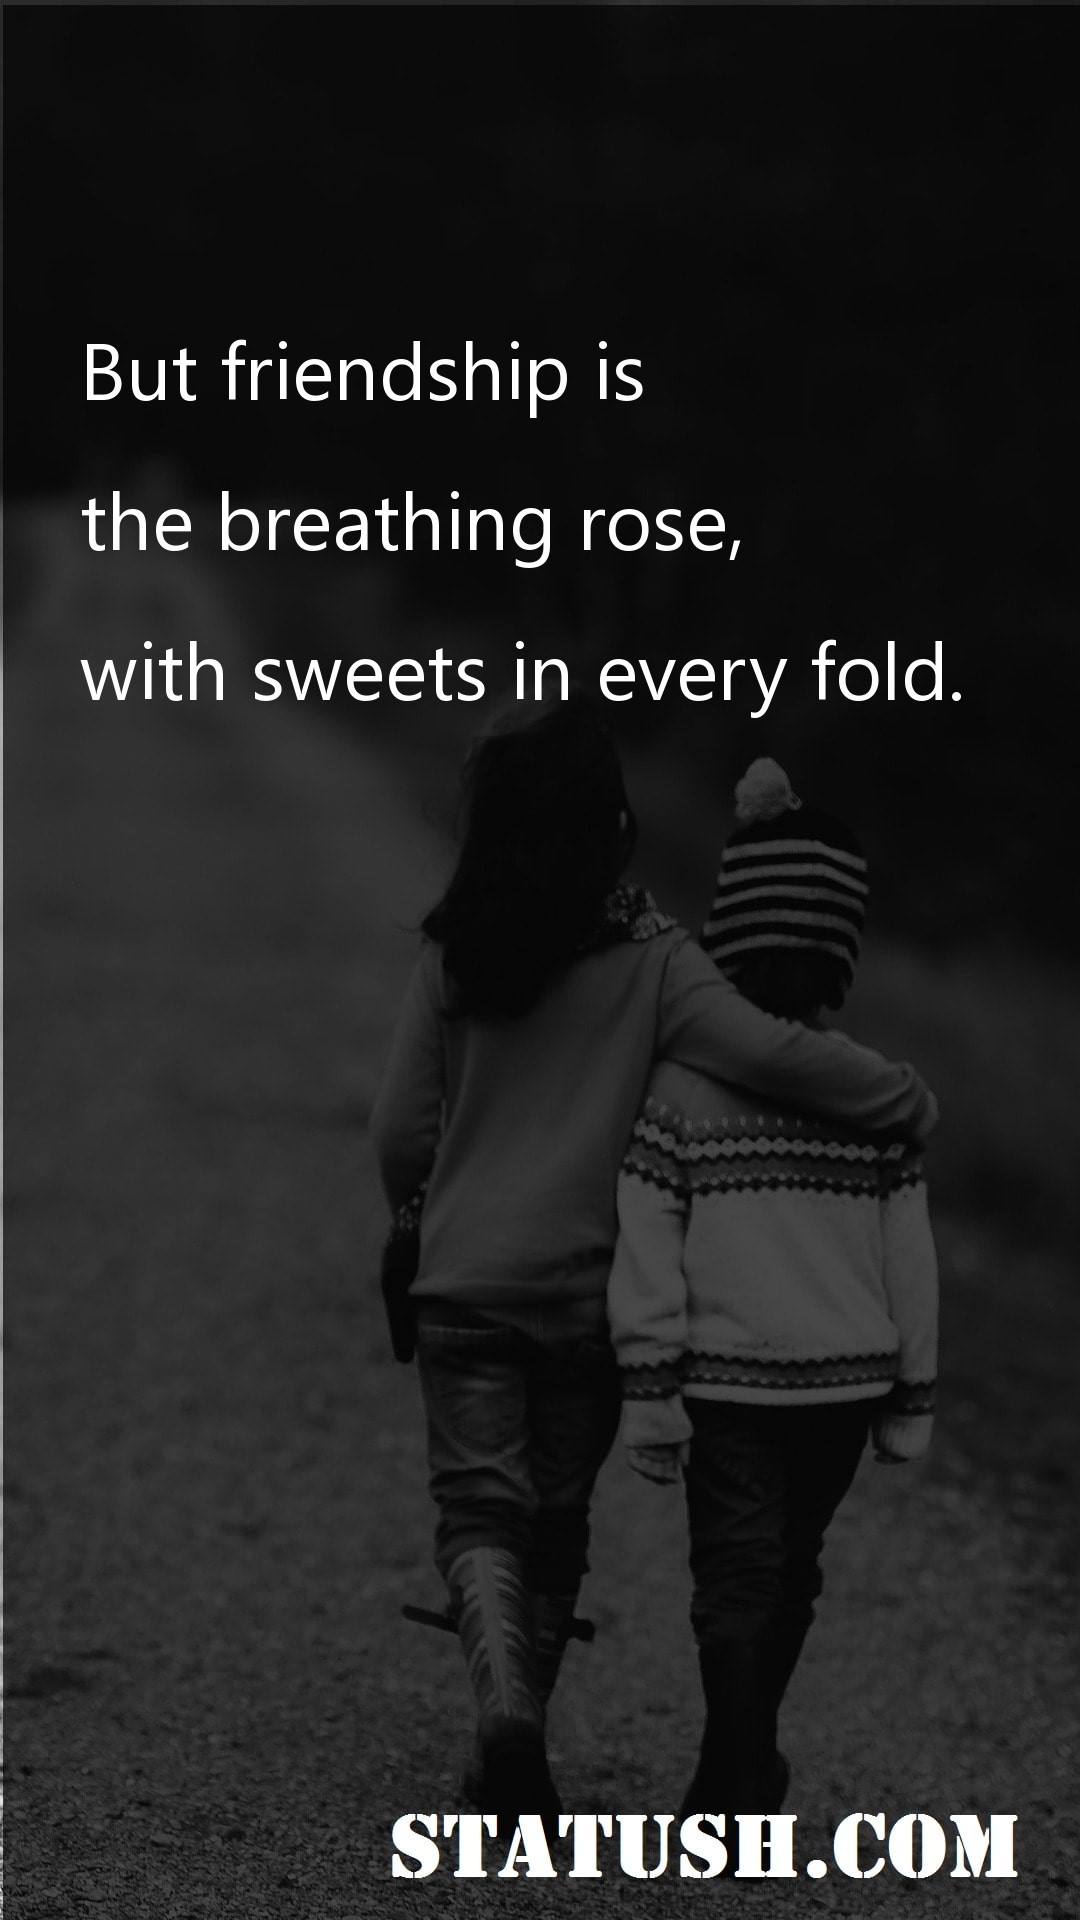 But friendship is the breathing rose - Friendship Quotes at statush.com